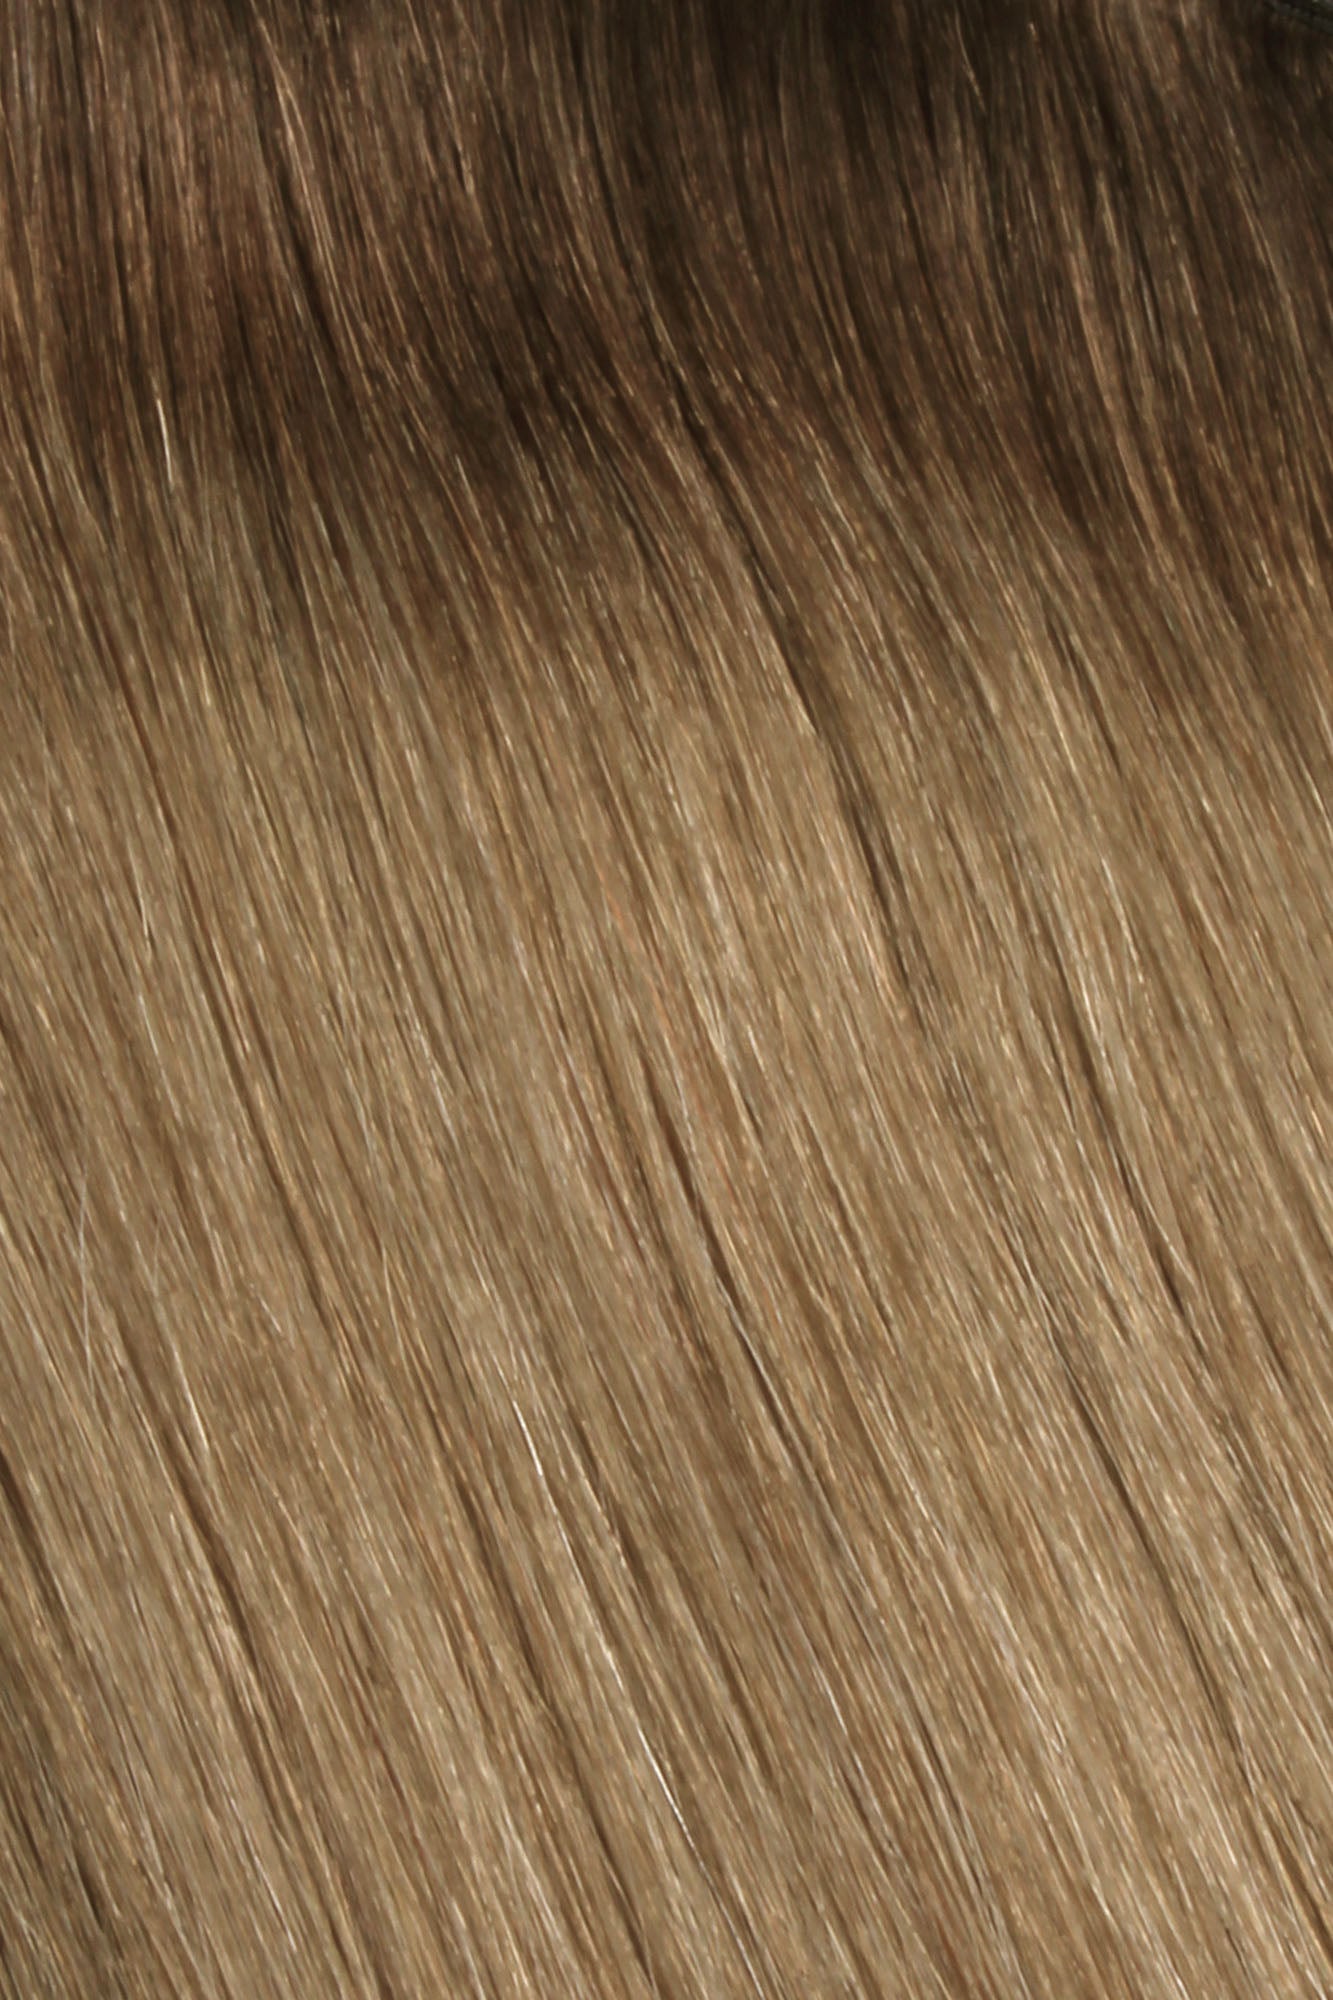 Tiny Tip Bonds 18&quot; -  SWAY Hair Extensions Rooted-Champagne-Chestnut: Lightweight, discreet. Made with Italian Keratin for comfort and long-lasting wear. Reusable and compatible with other SWAY Salon Professional Methods